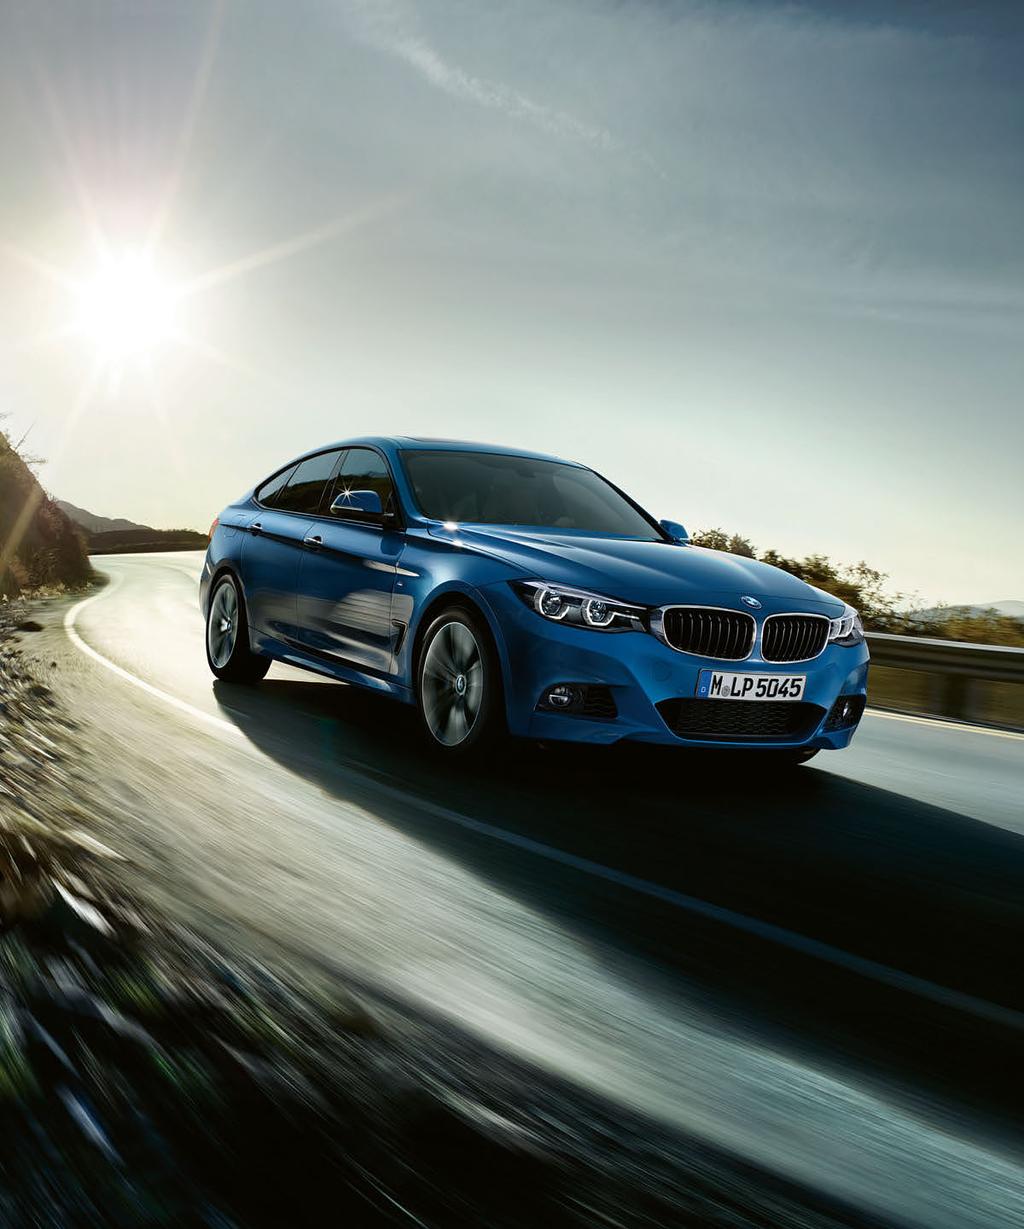 The Ultimate Driving Machine THE BMW 3 SERIES GRAN TURISMO.